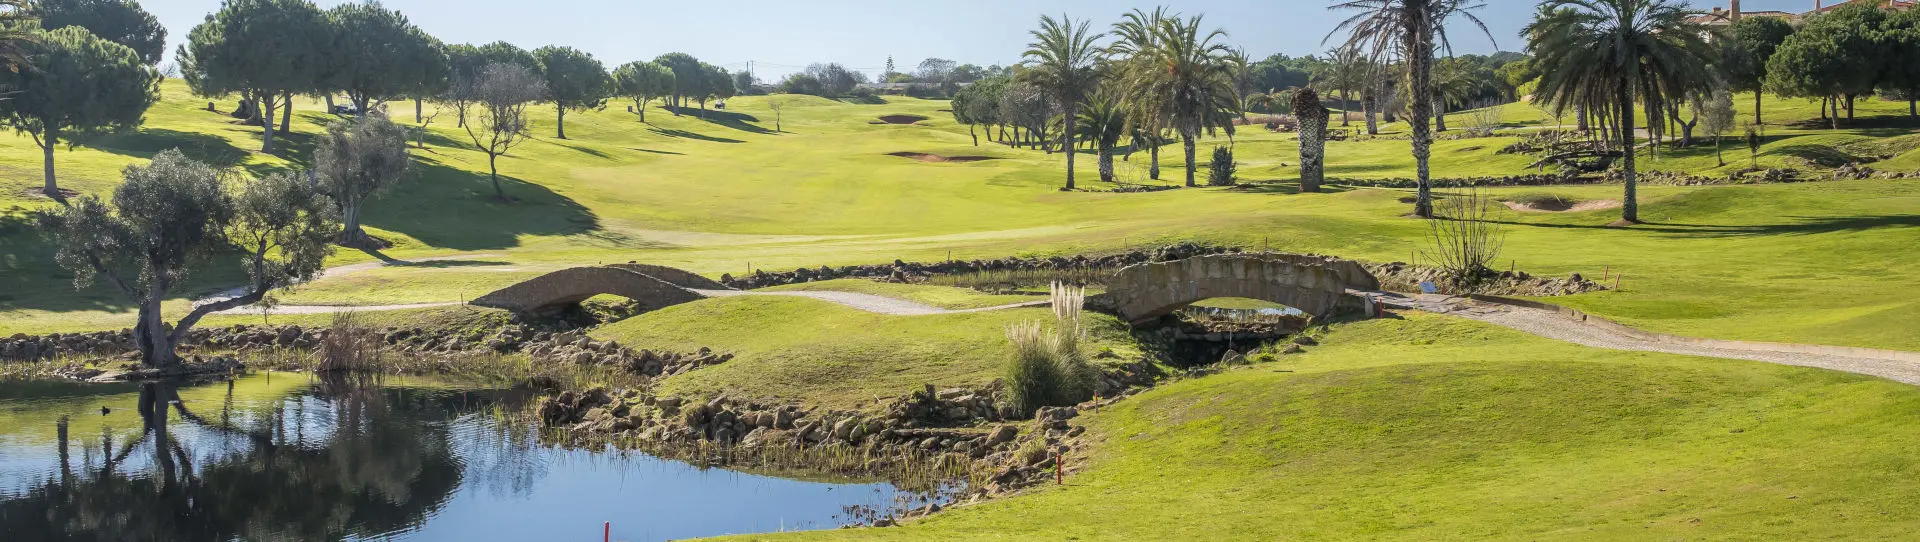 Portugal golf holidays - 3 Nights SC & Unlimited Golf Rounds<br>Groups of 4 - Photo 3